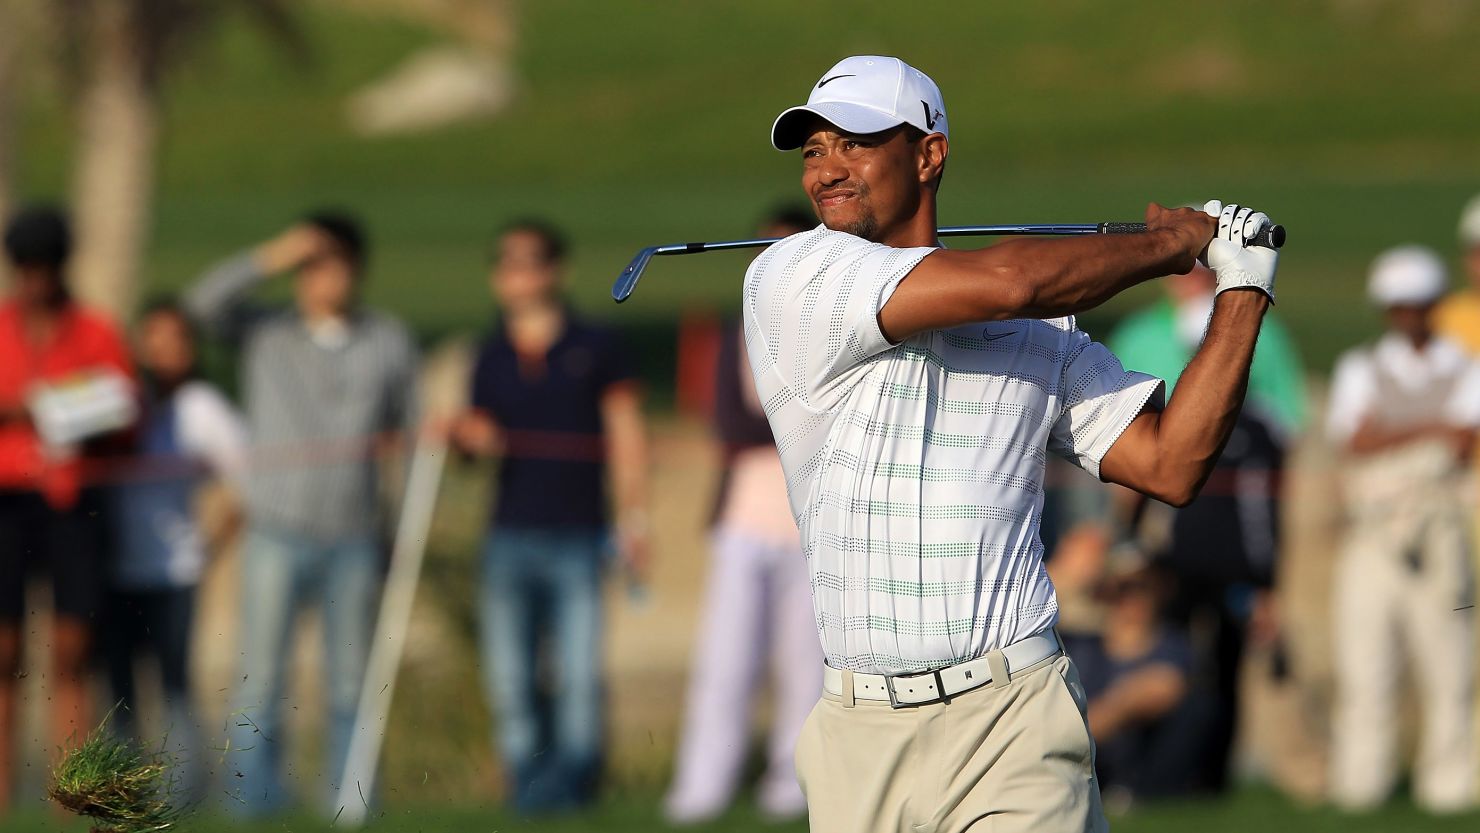 Tiger Woods was pleased with his play in the second round of the Abu Dhabi Golf Championship.